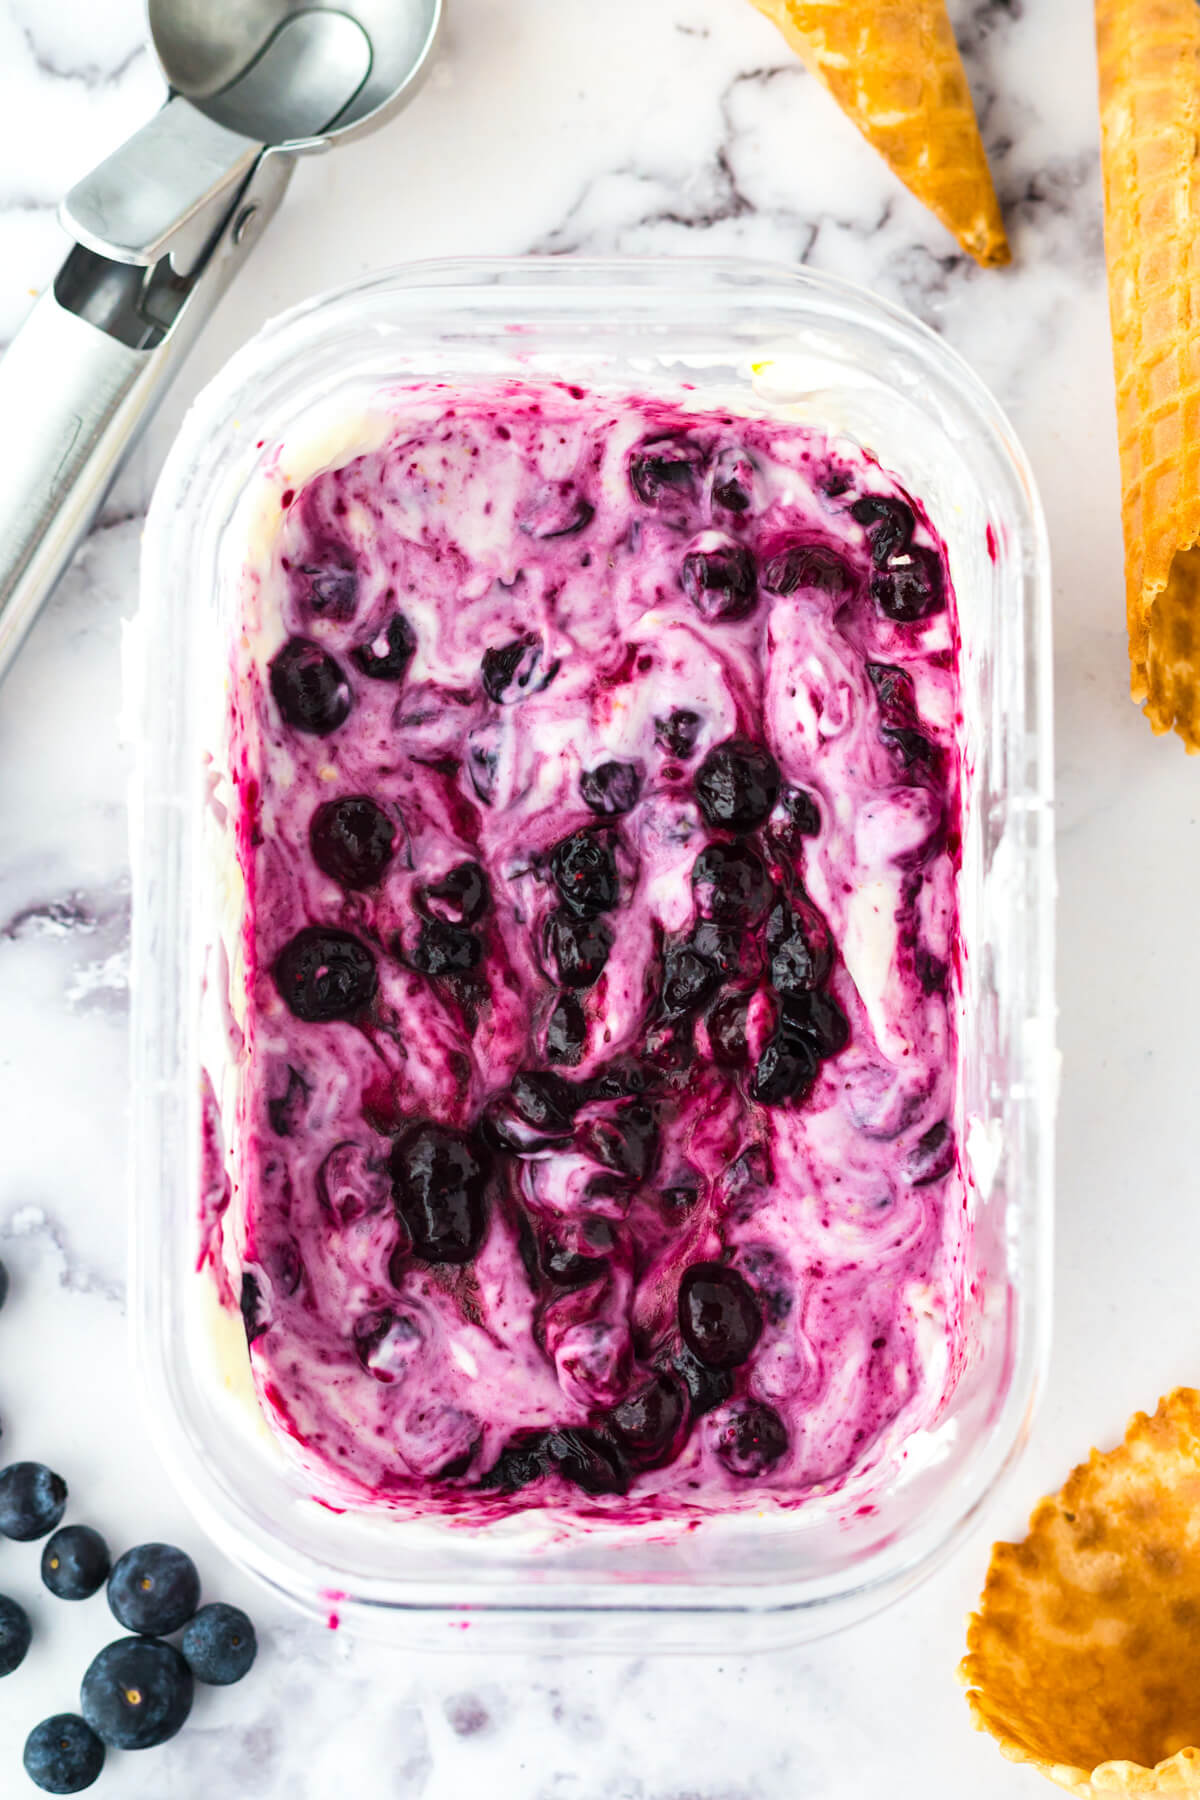 An ice cream tub filled with Blueberry Cheesecake Ice Cream.